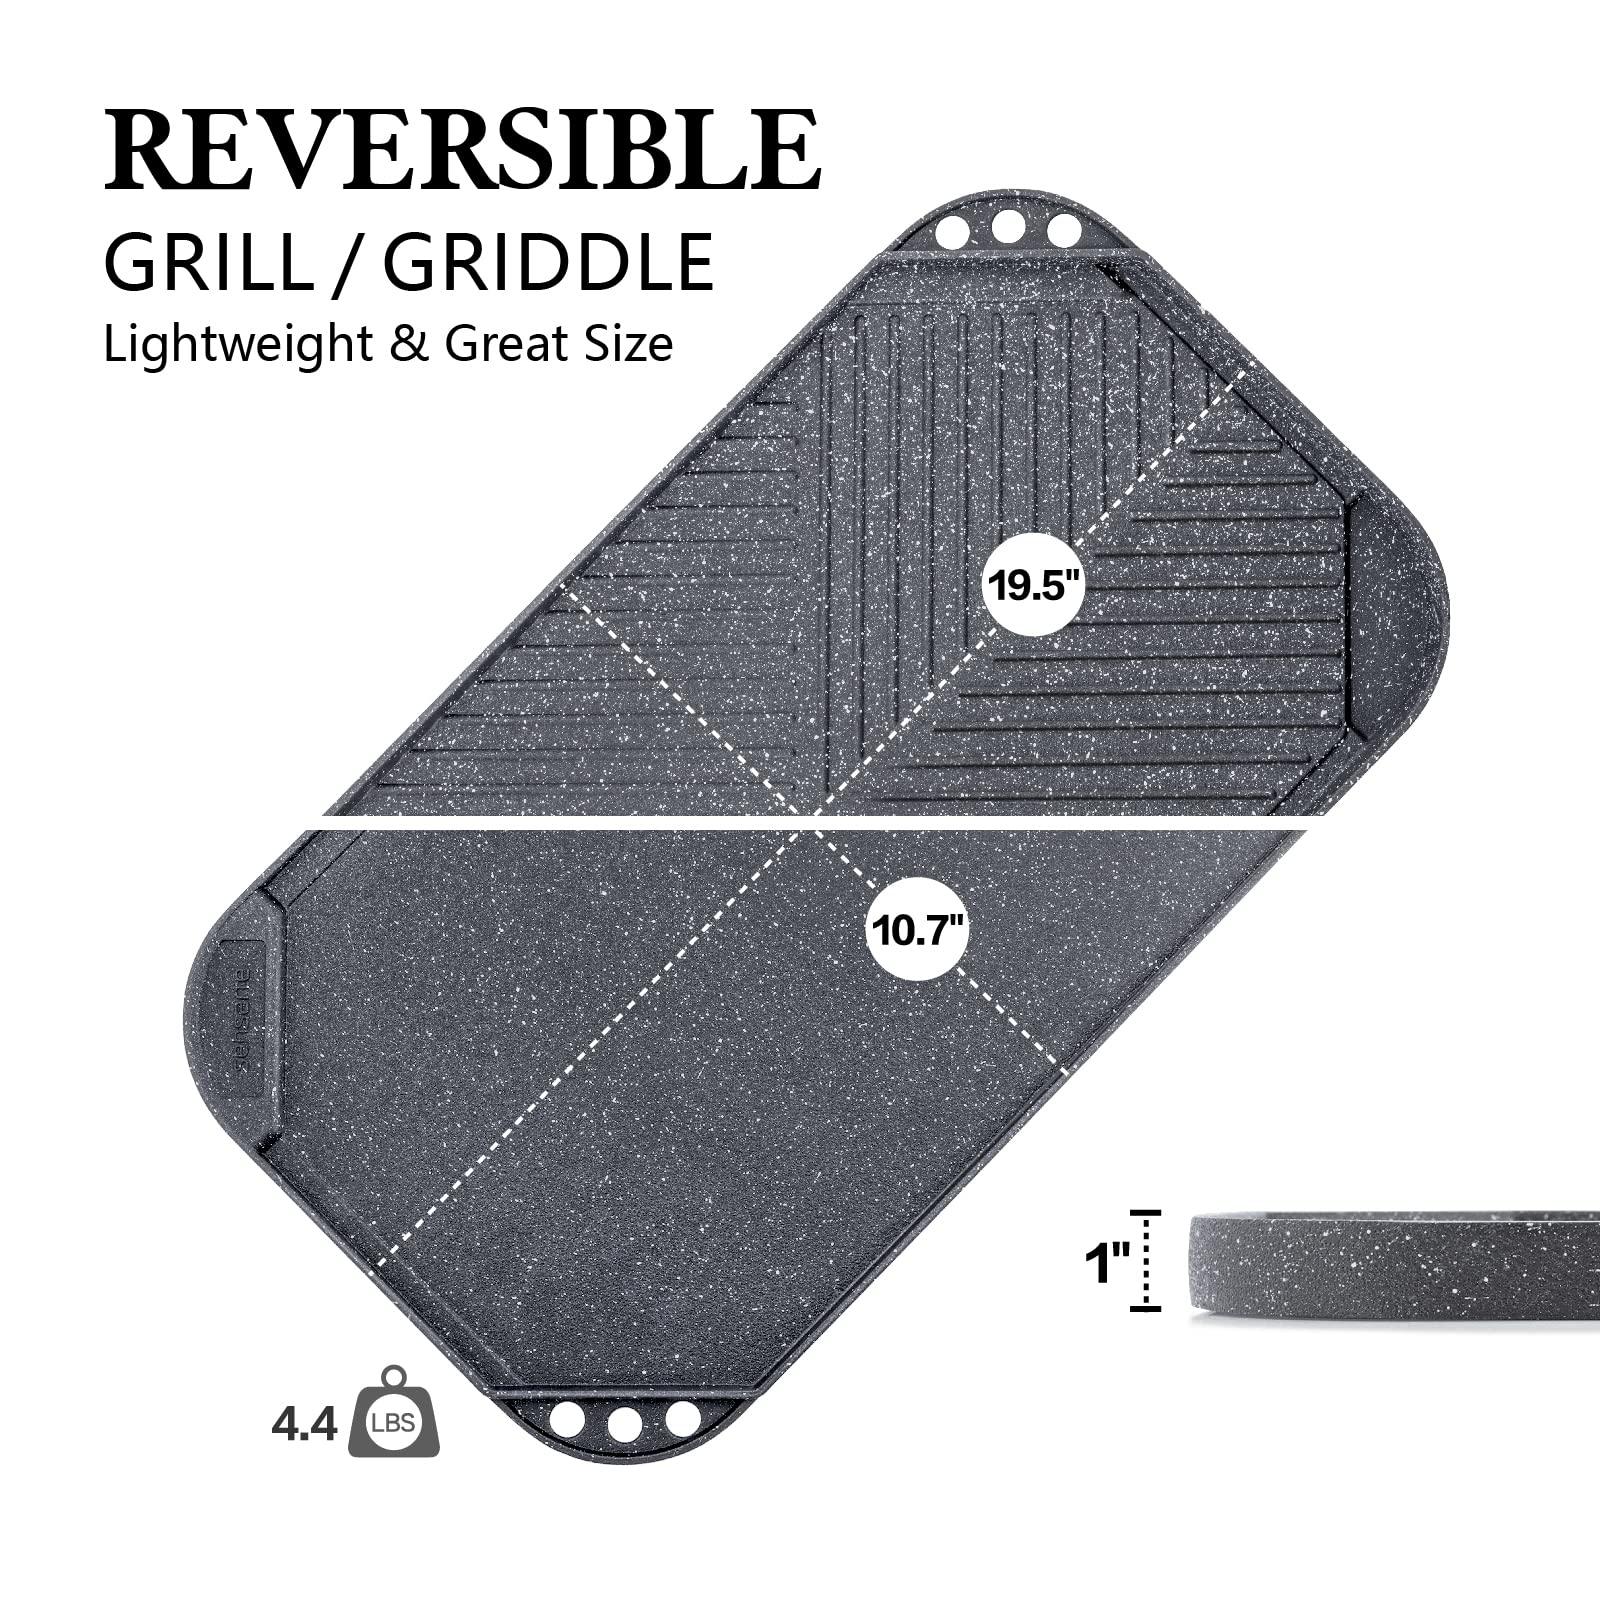 SENSARTE Nonstick Griddle Grill Pan, Reversible Grill & Griddle Pan, Two Burner Cast Aluminum Griddle, Portable for Indoor Stovetop or Outdoor Camping BBQ, 19.5" x 10.7" (Grey) - CookCave